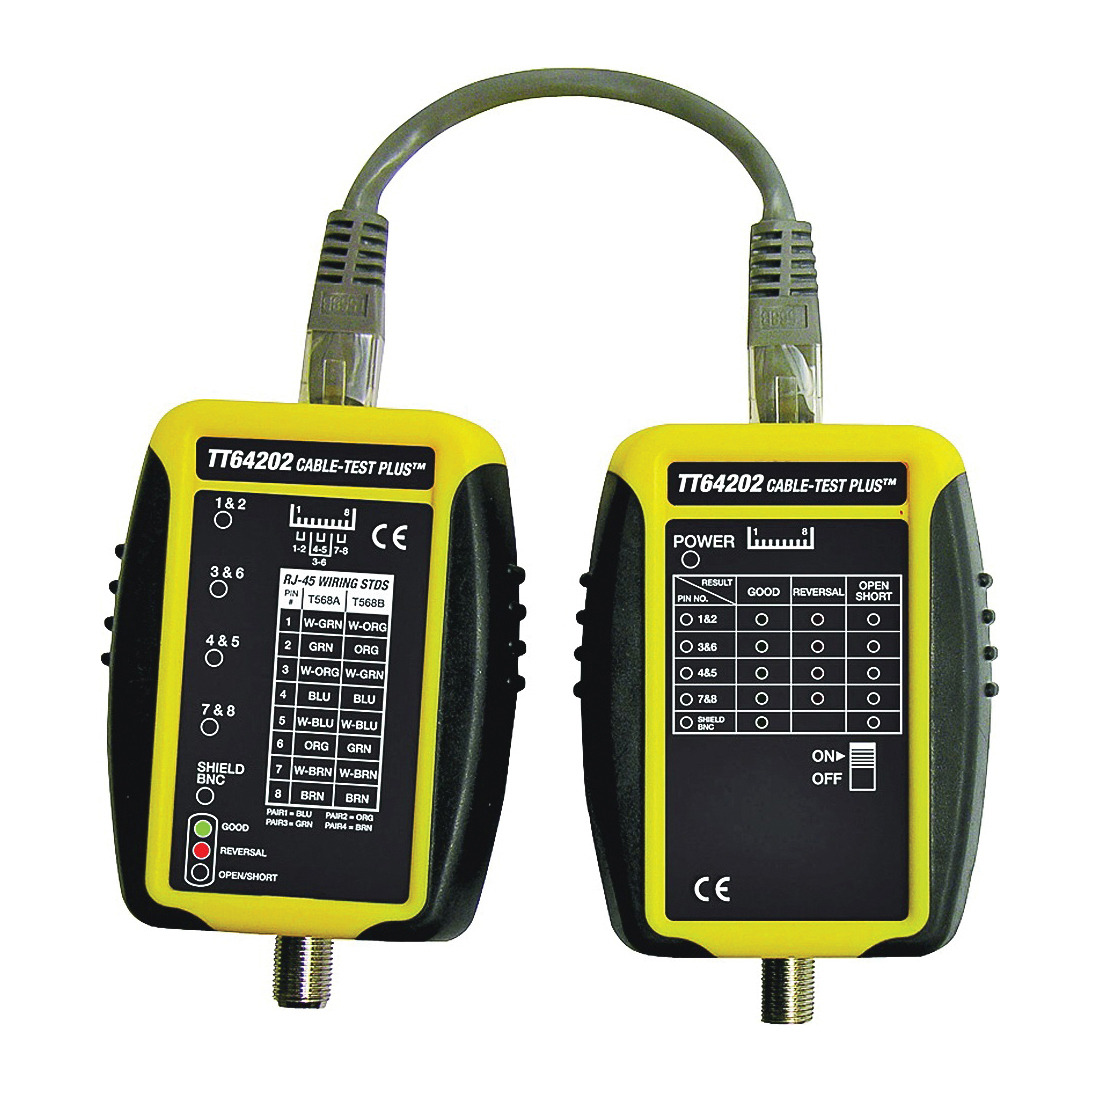 Cable-Test Series TT64202 Cable Tester, Black/Yellow